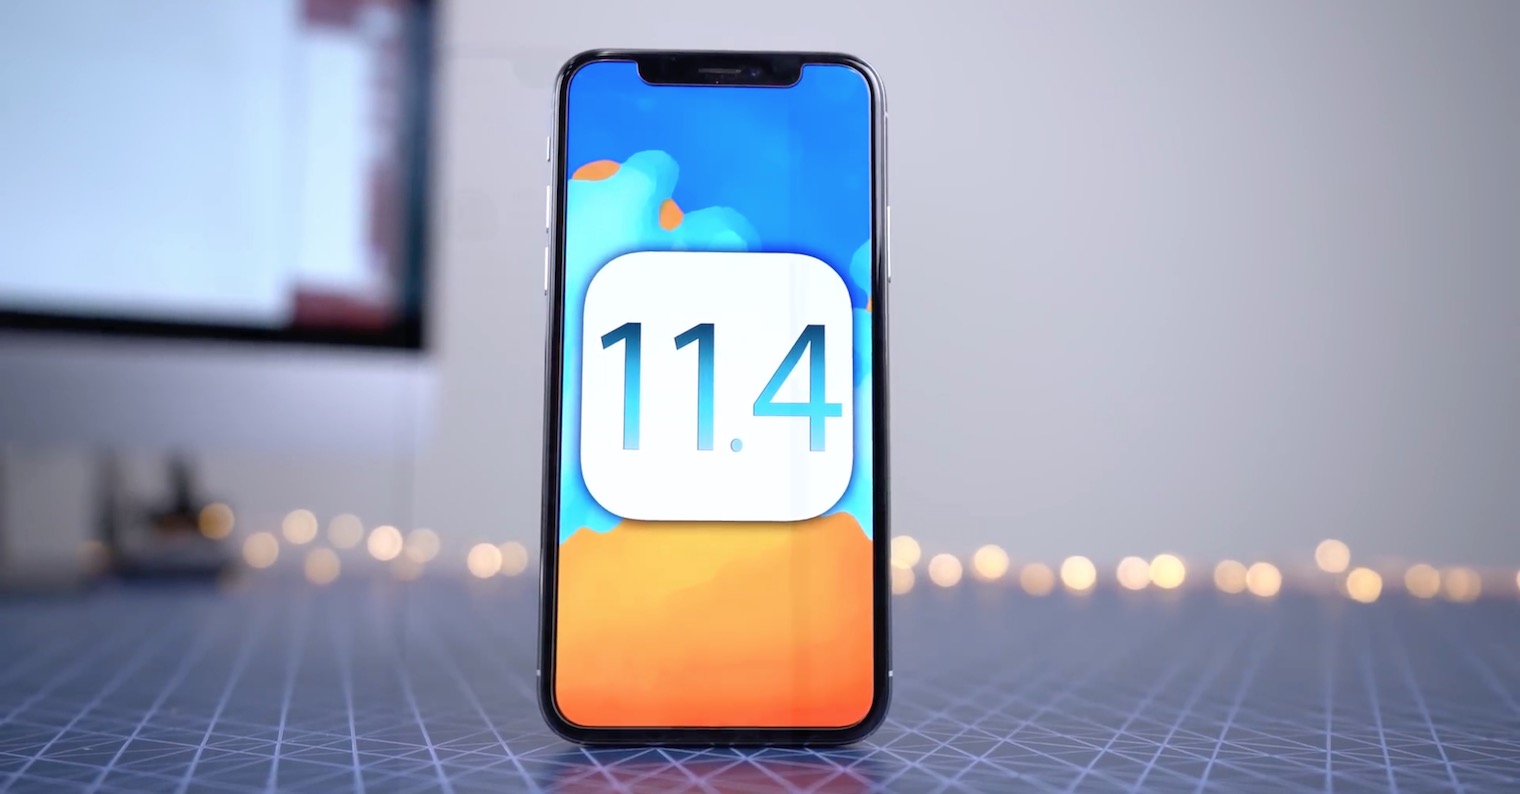 iOS 11.4 Final is Available for iPhone and iPad, Download Now